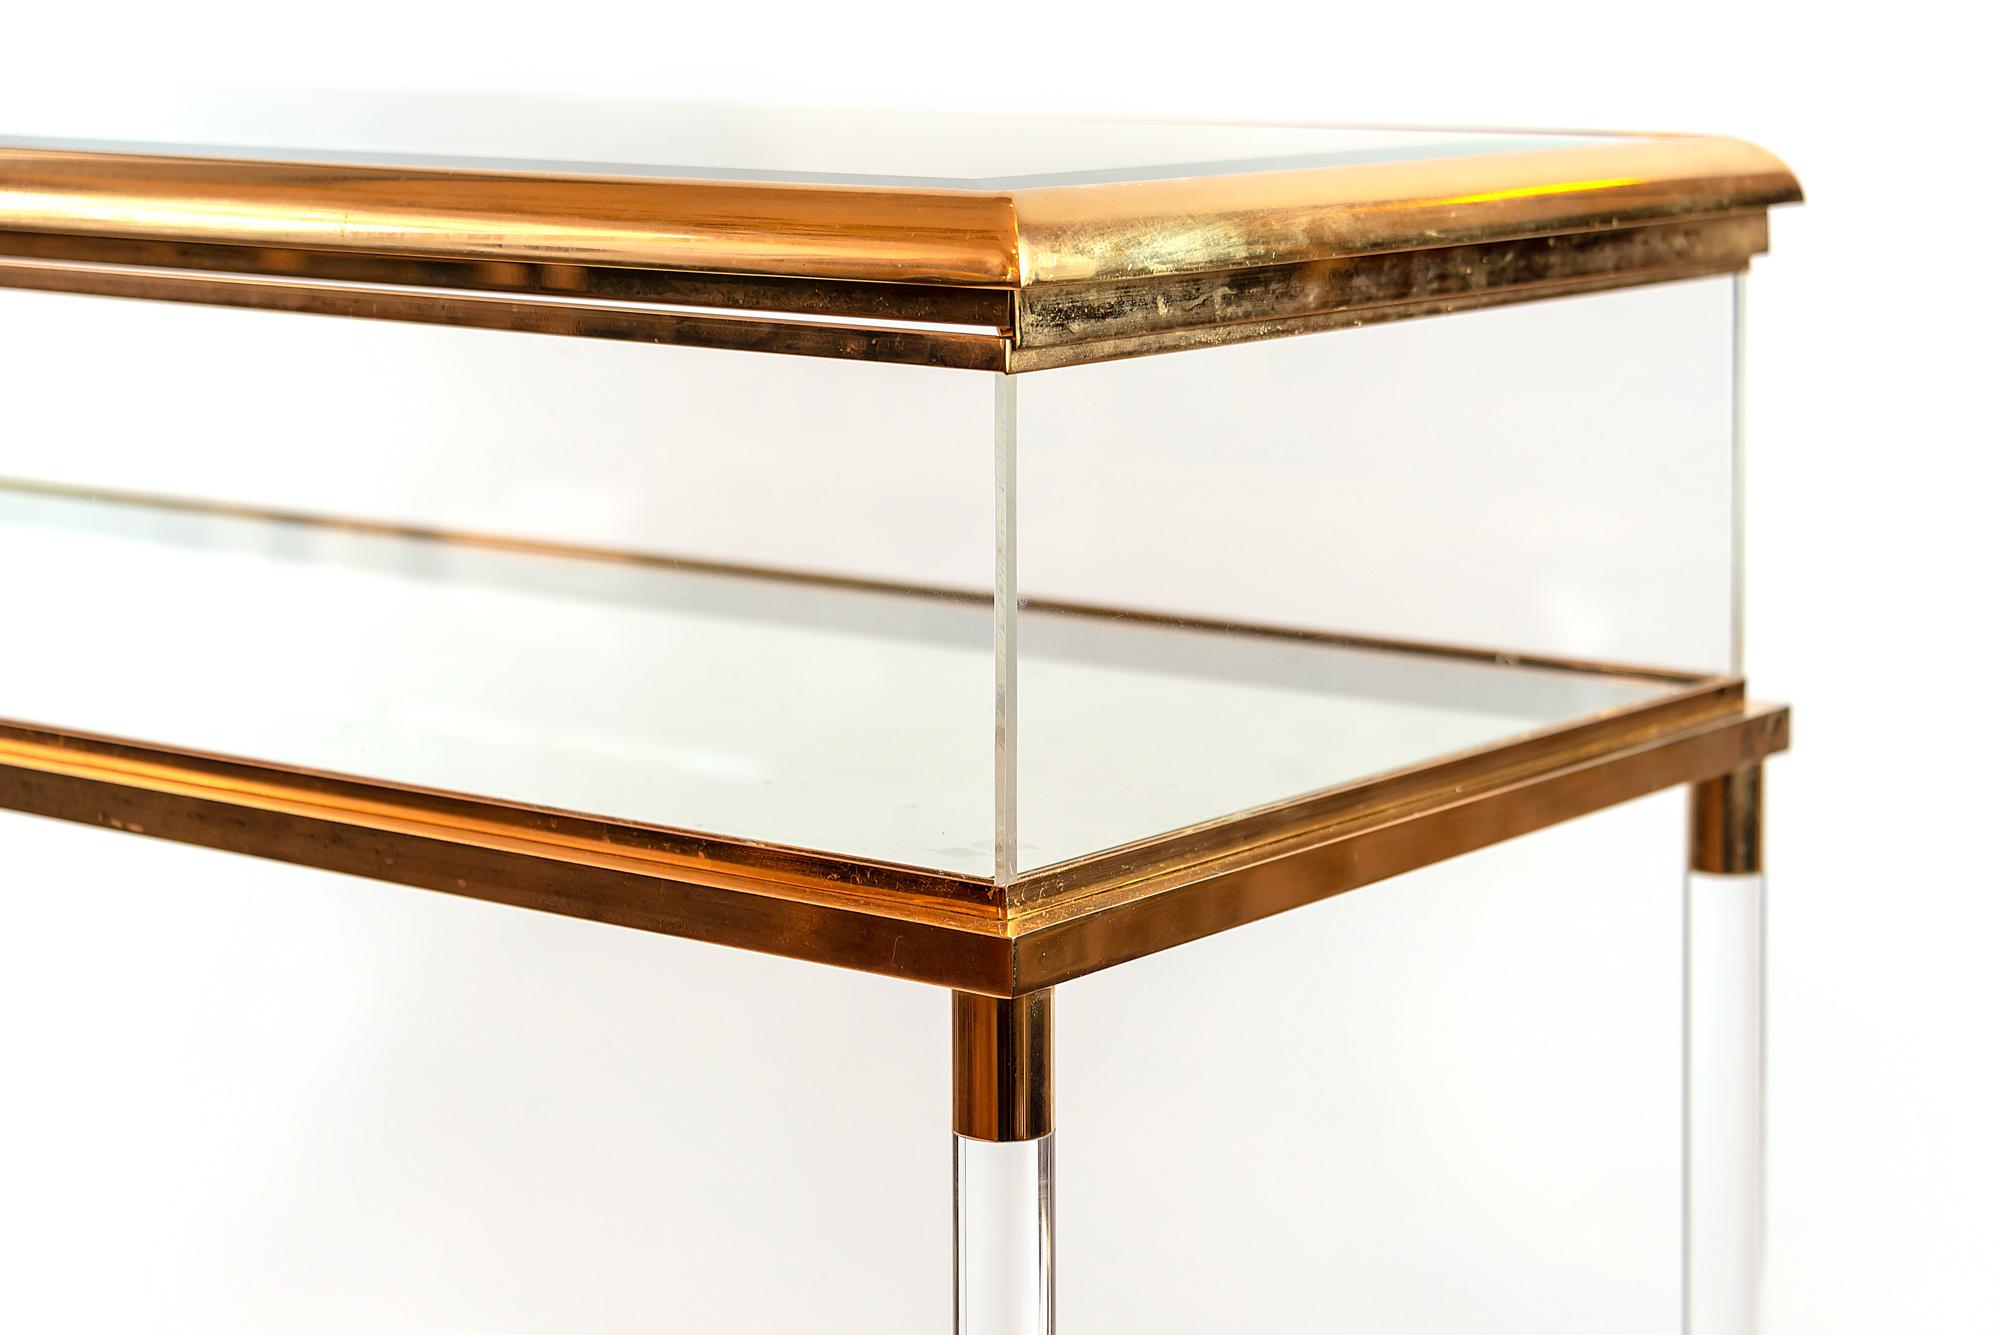 This midcentury French console table - showcase with glass top, plexi glass legs, brass frame, polished golden color finish. The top of it is sliding to one side.